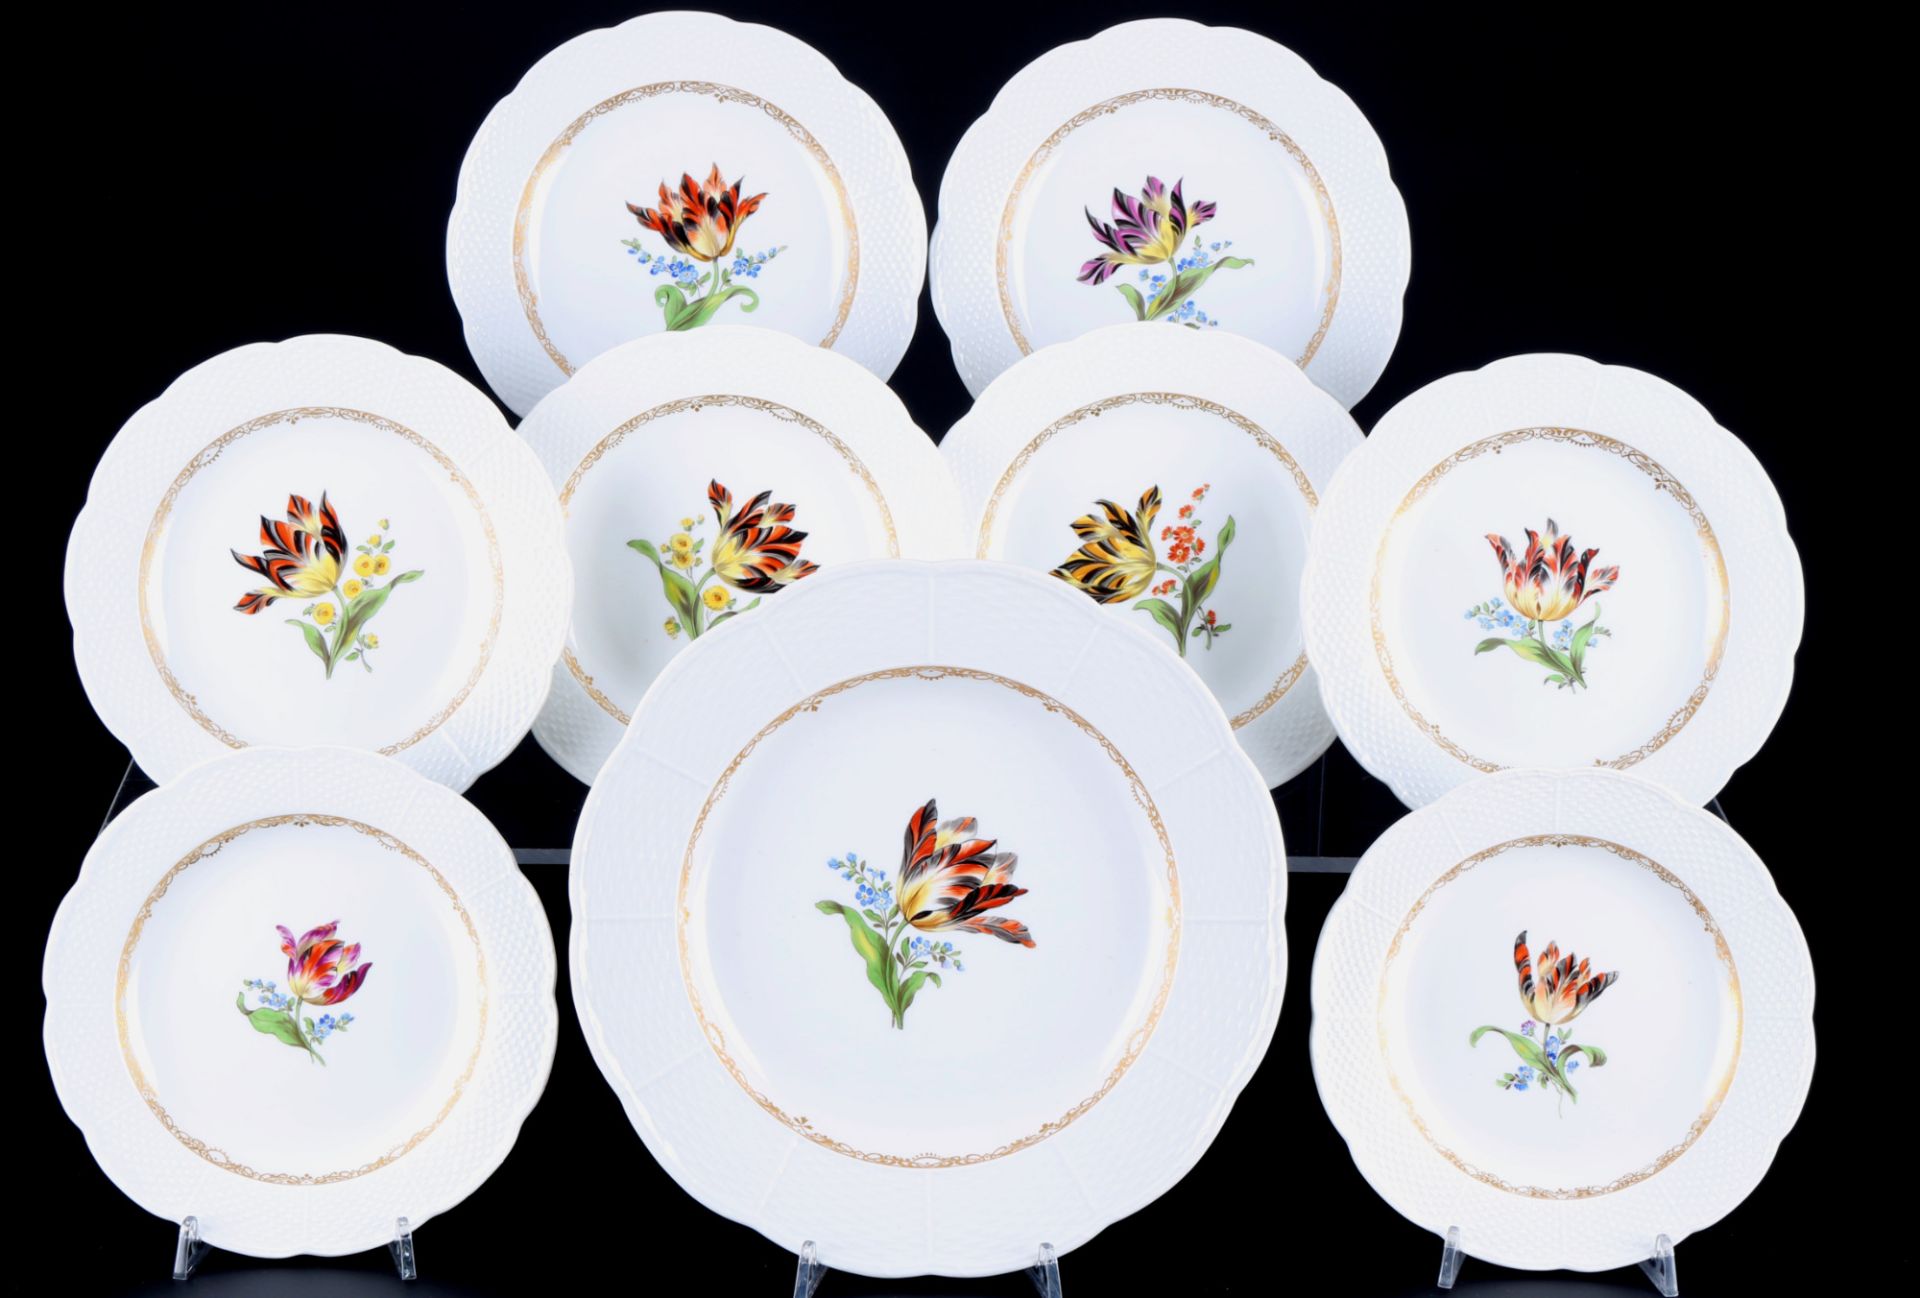 Meissen Marcolini-Tulpe 9 Teller 1.Wahl, dessert plates with dinner plate 1st choice,